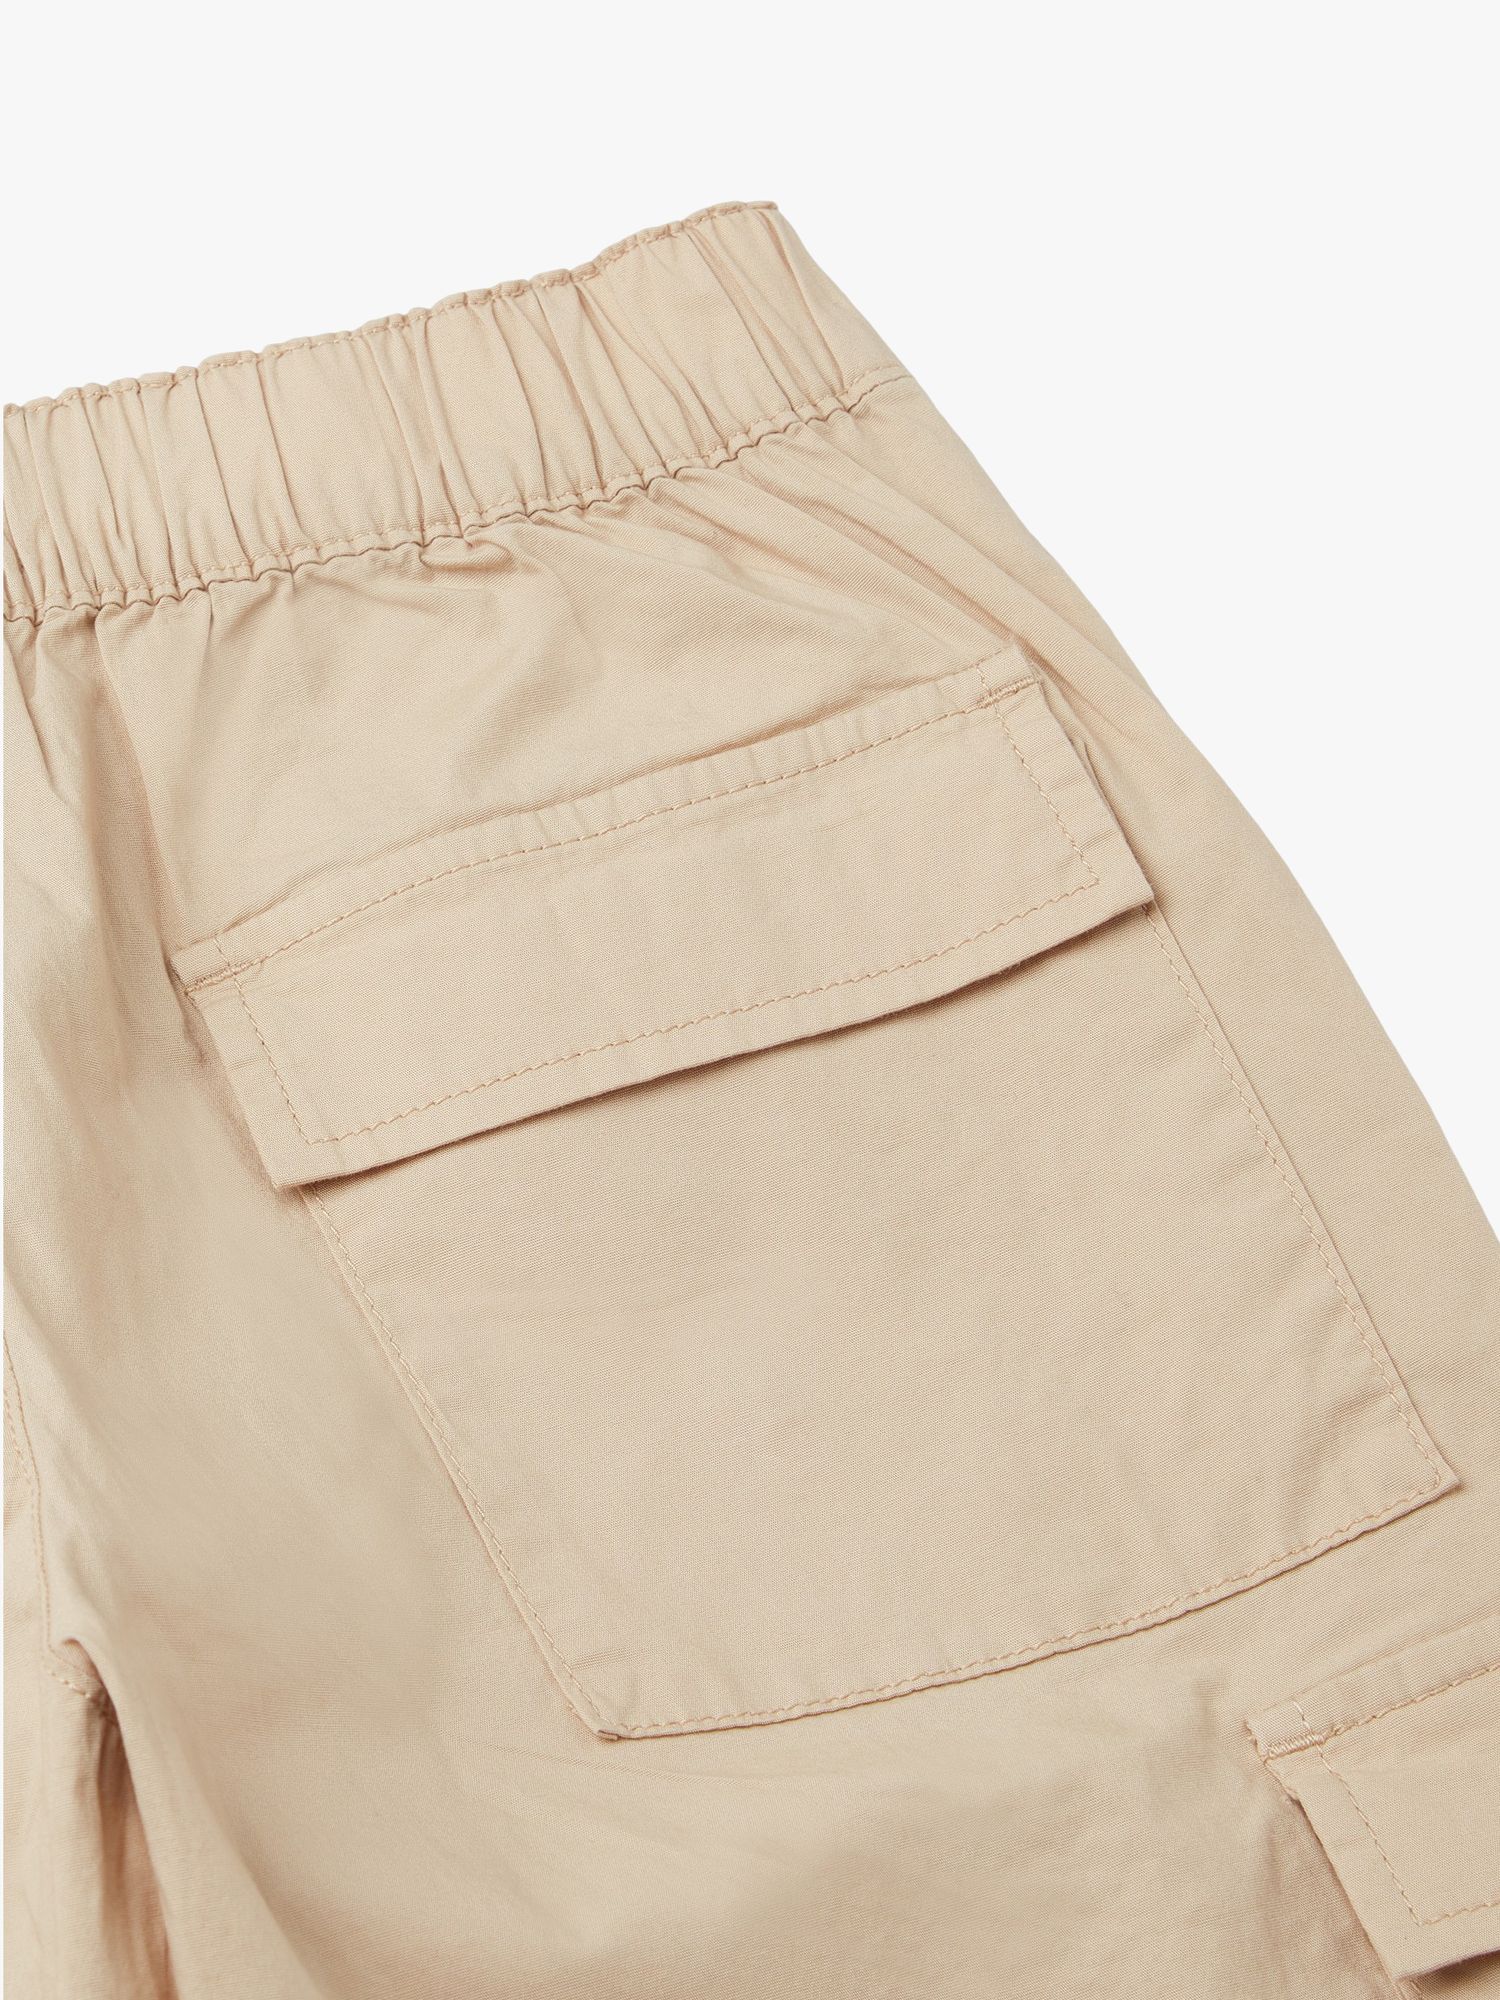 Buy Benetton Kids' Cargo Trousers Online at johnlewis.com